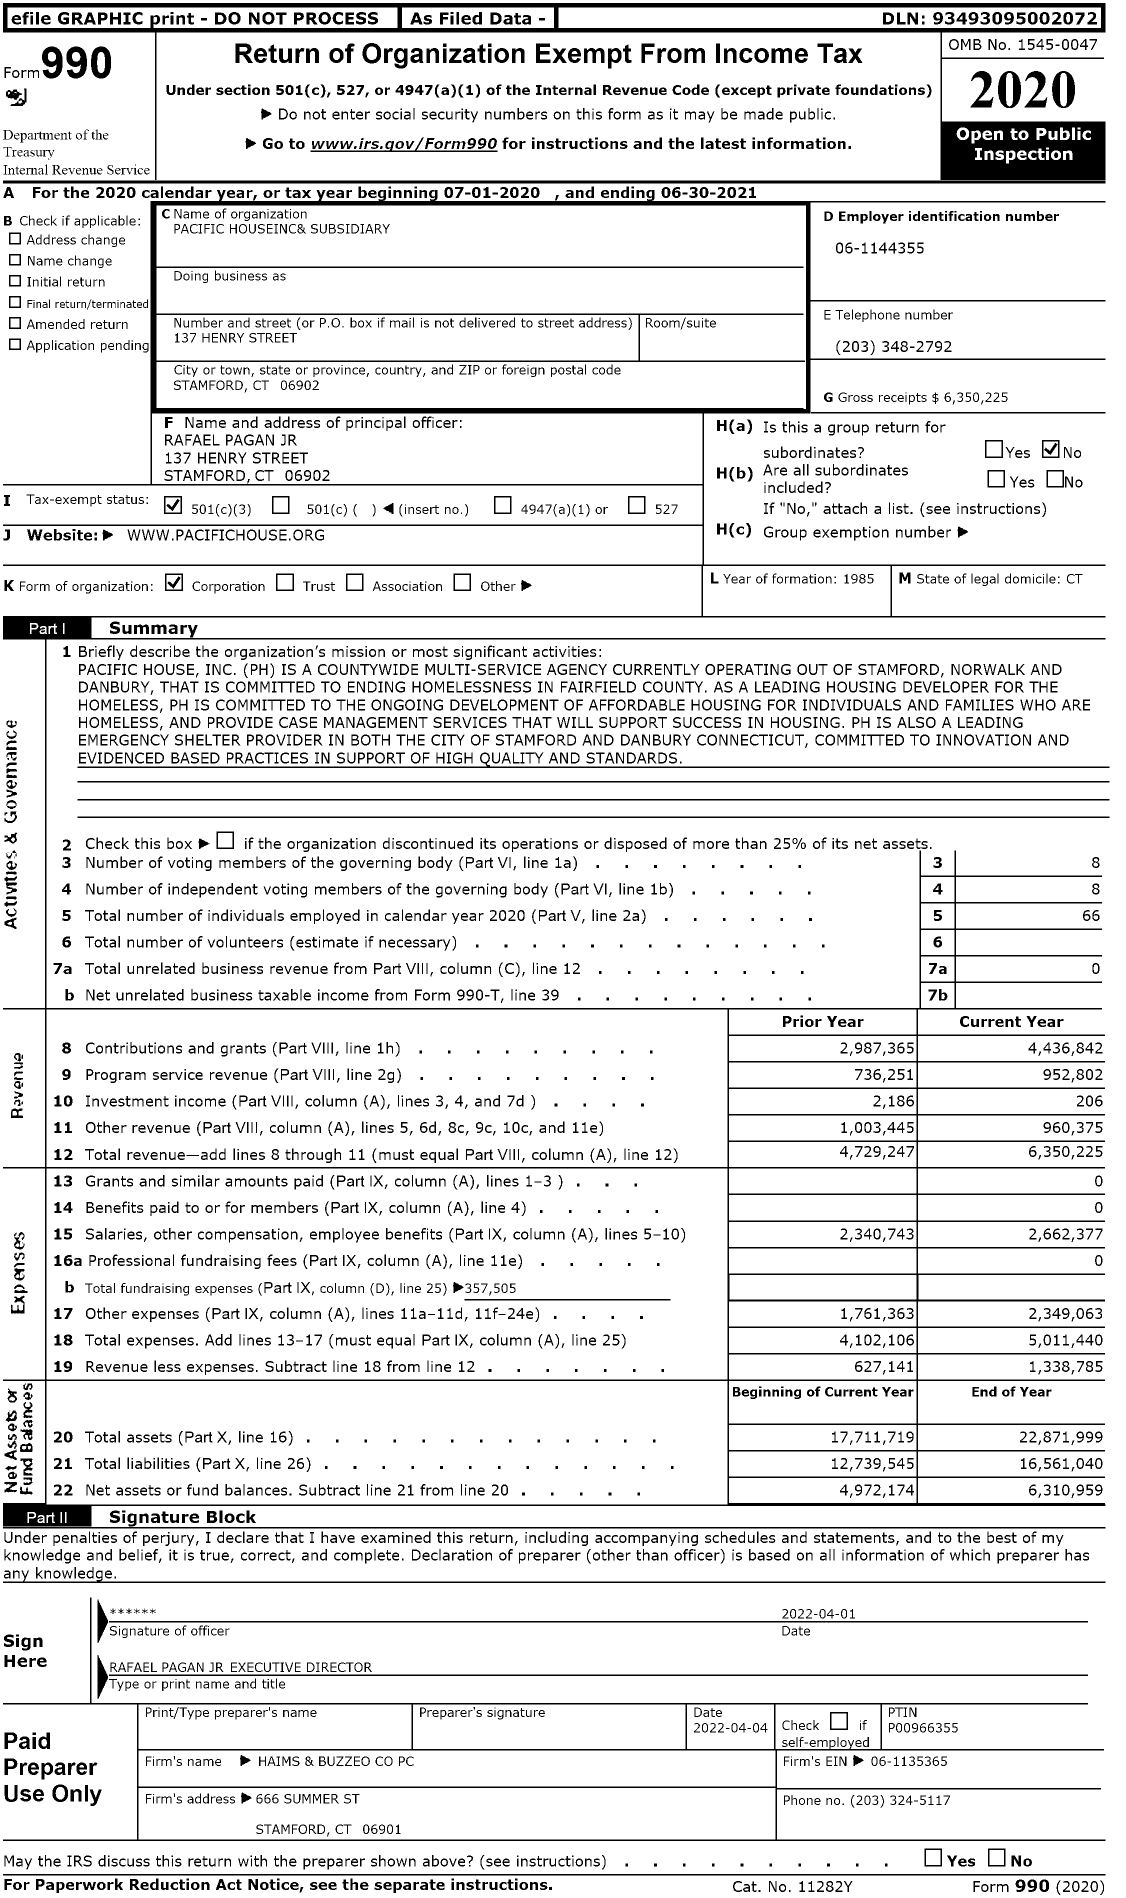 Image of first page of 2020 Form 990 for Pacific Houseinc& Subsidiary